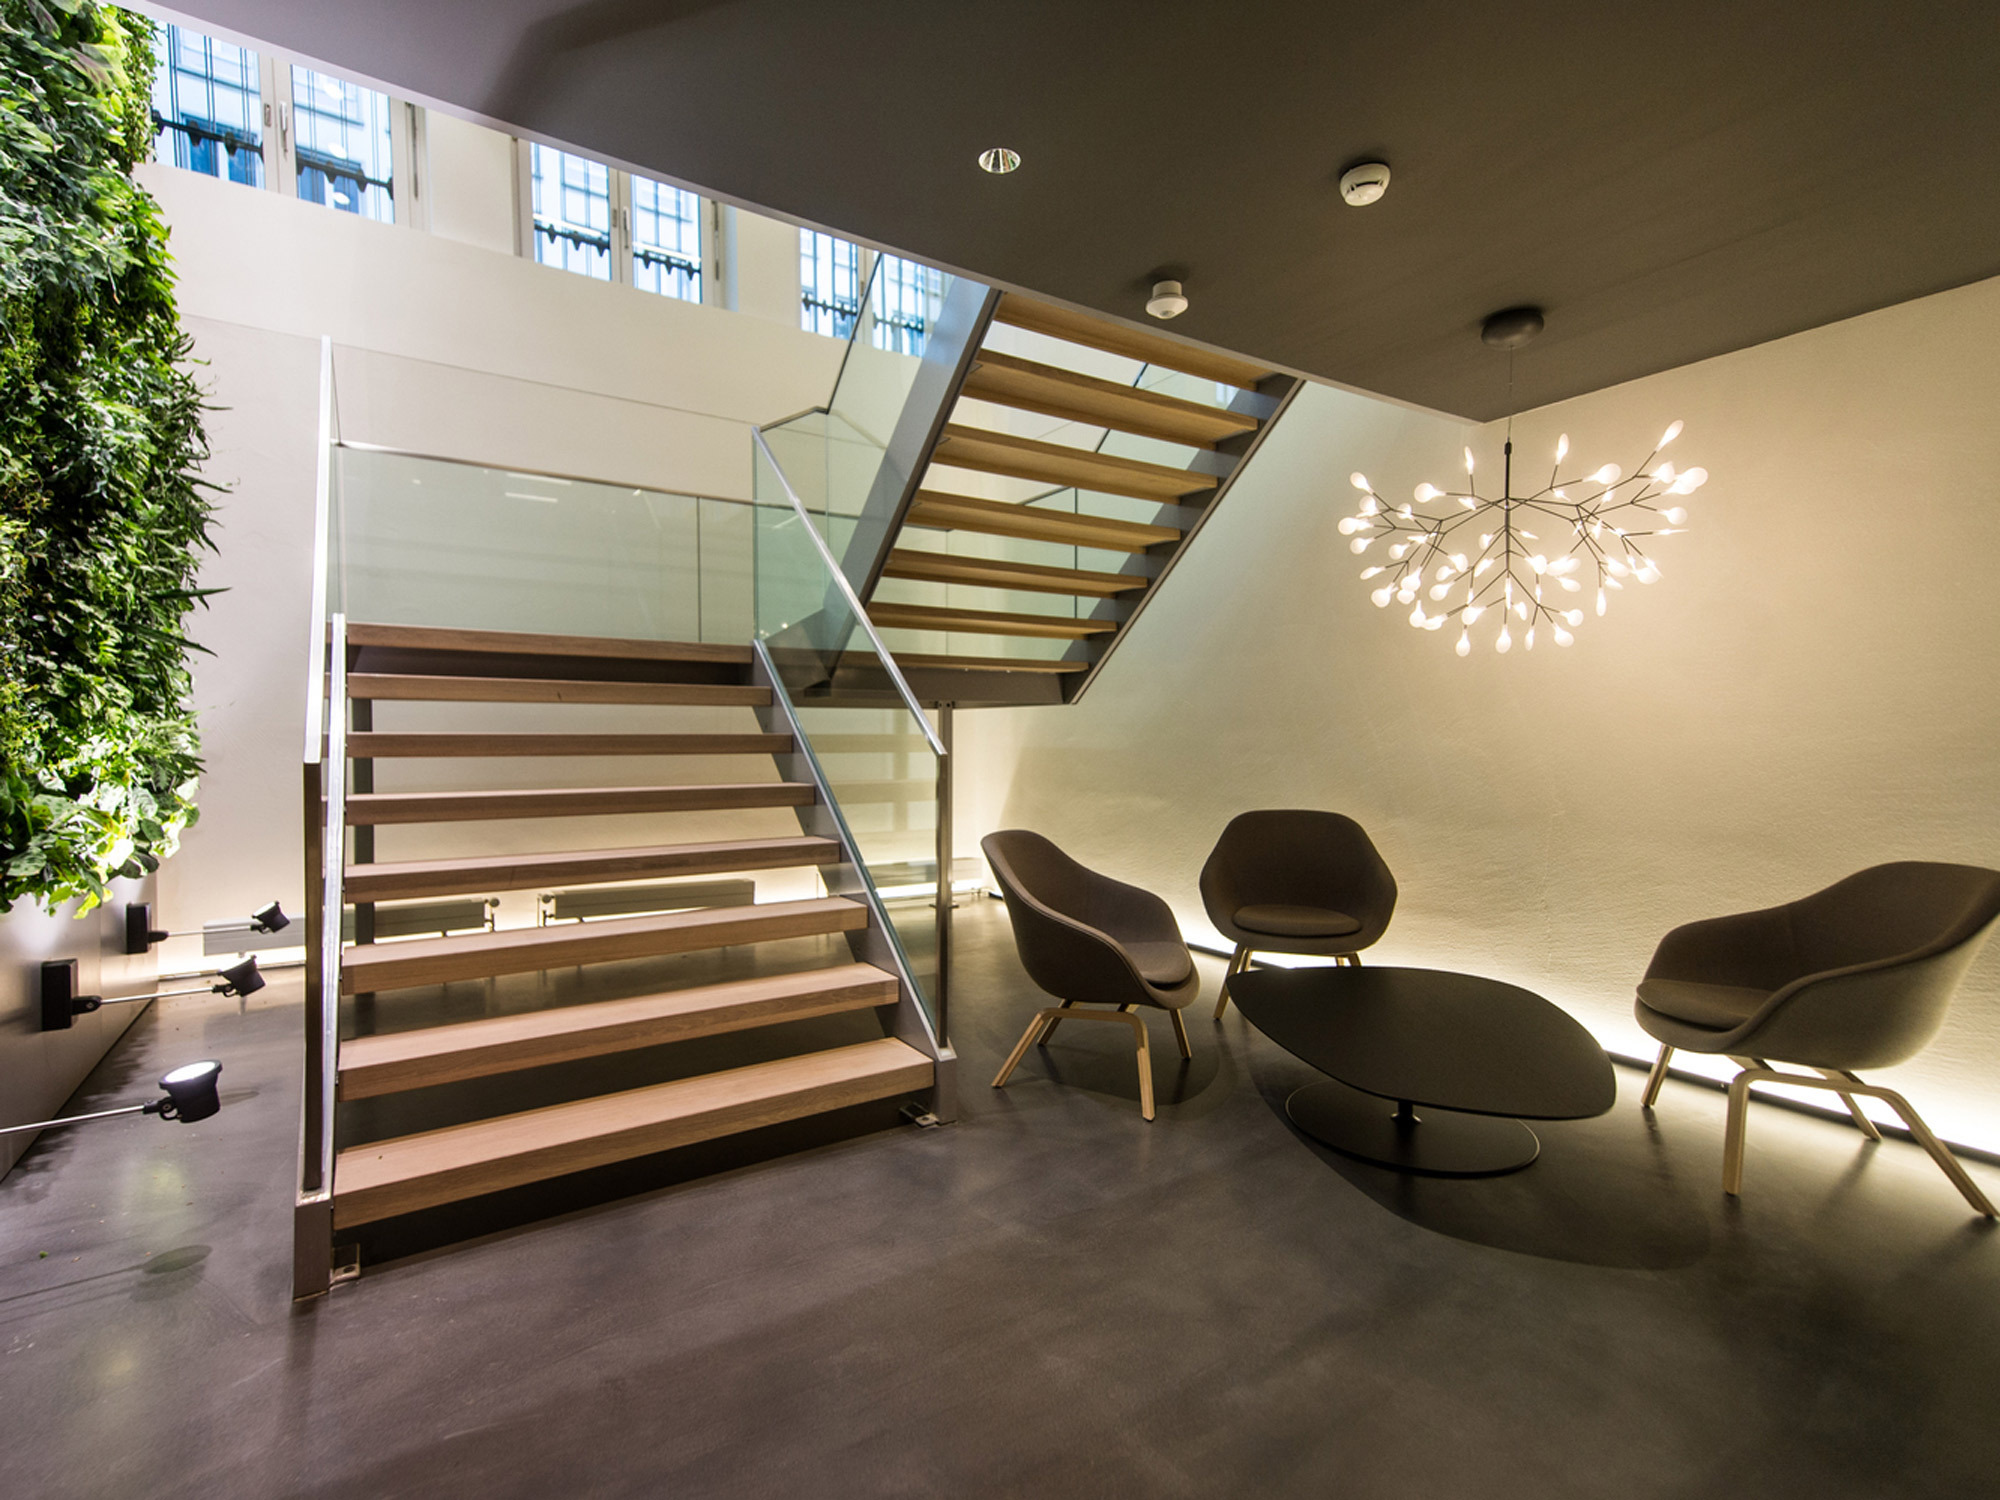 Modern staircase in a contemporary space with floating wooden steps, glass balustrades, and a vertical garden, complemented by minimalist seating and a statement lighting fixture.